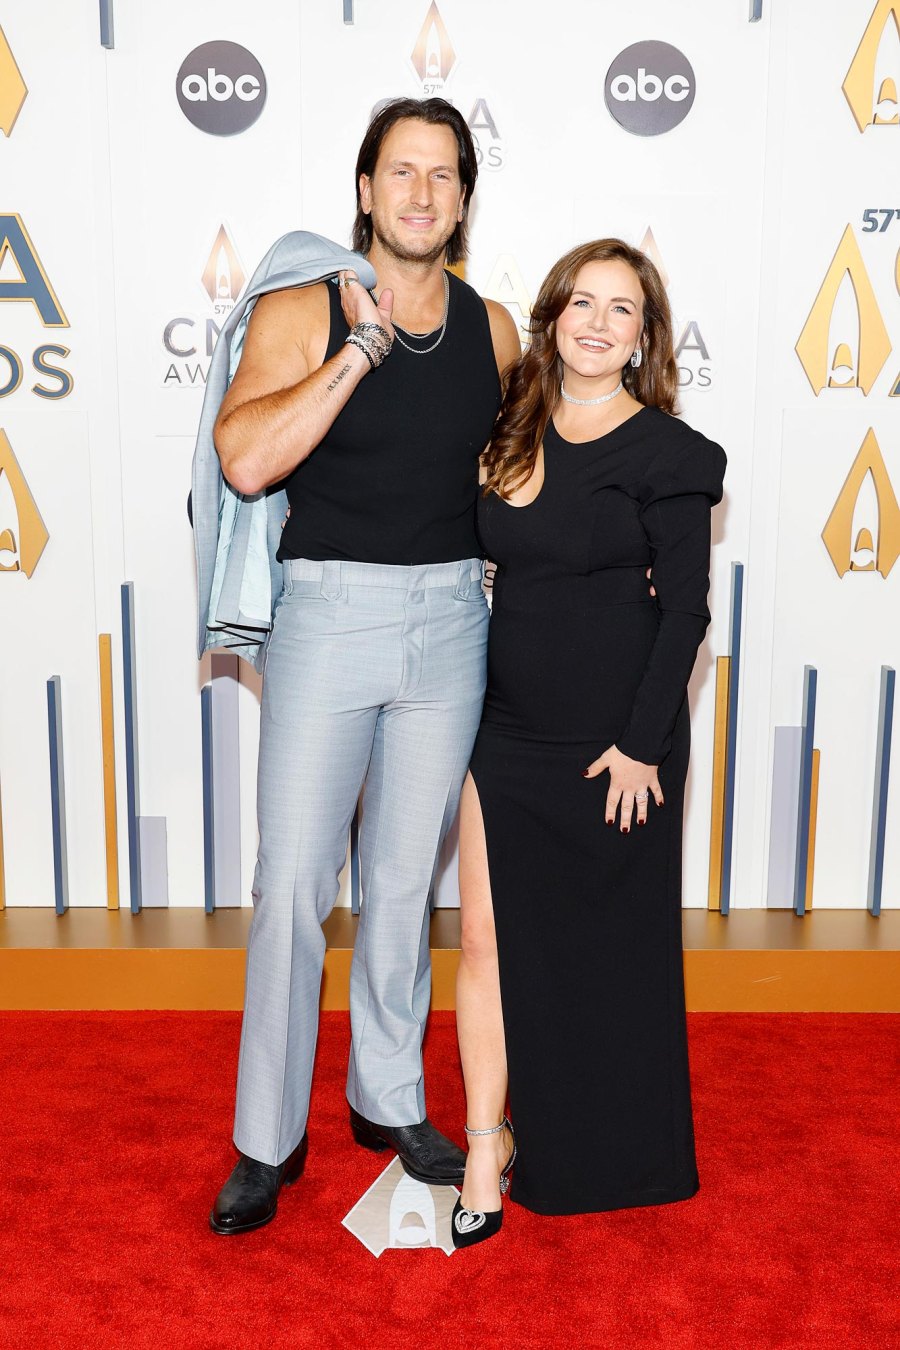 The Cutest Country Music Couples at the 2023 CMA Awards Chris Stapleton and Morgane Stapleton More 390 Russell Dickerson and Kailey Dickerson